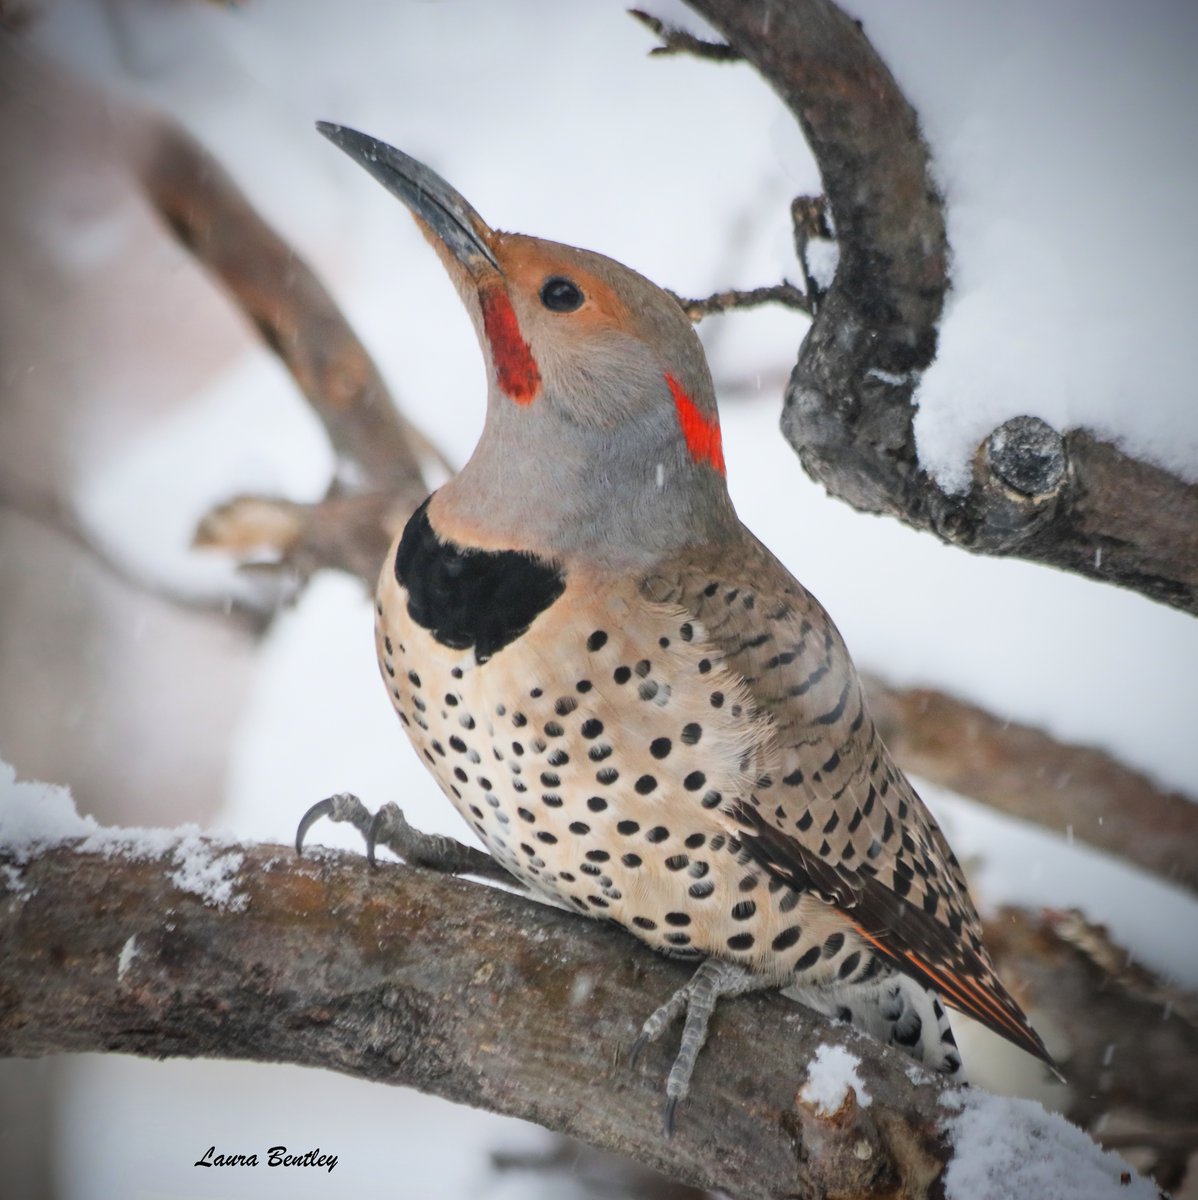 Mr. Intergrade, the most beautiful of the flickers on this snow day in Calgary.  #BirdsAreBeautiful